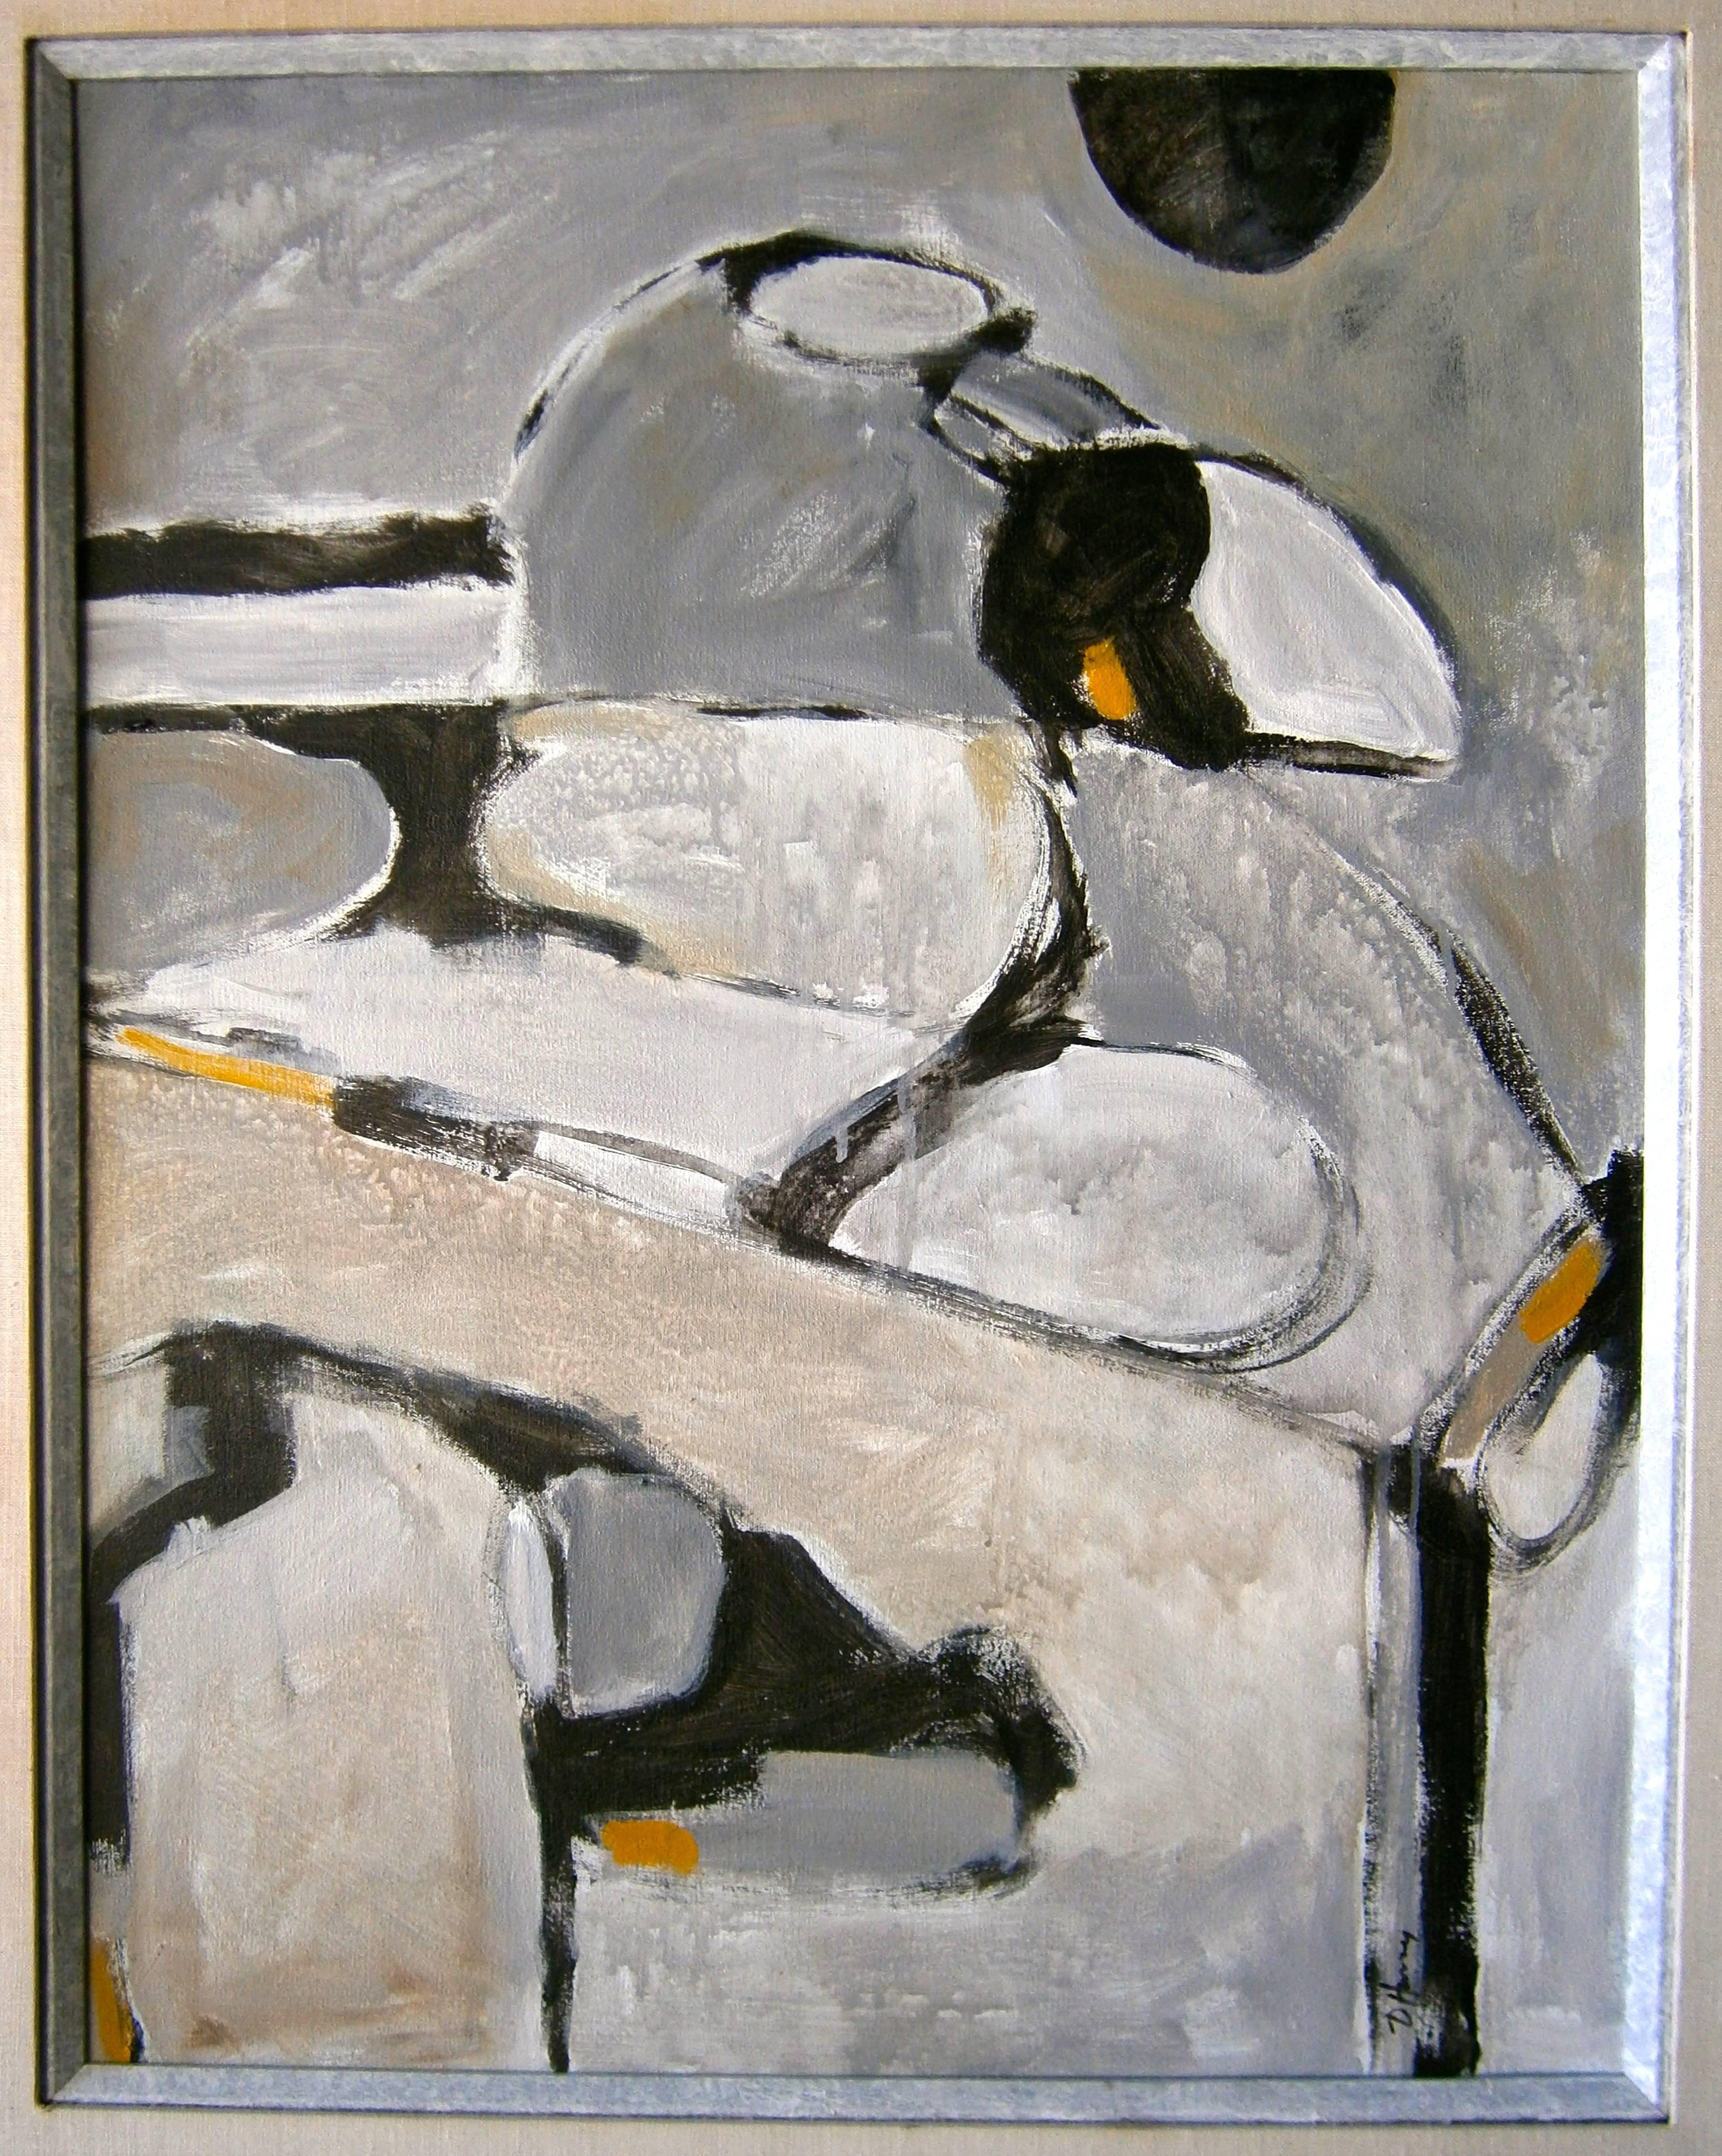 A framed acrylic on canvas abstract composition by American artist David E. Henry (b. 1946). Signed in the lower left and dated March 1973 on the verso.
Show in its original frame.
David Henry is a contemporary artist that works in a variety of